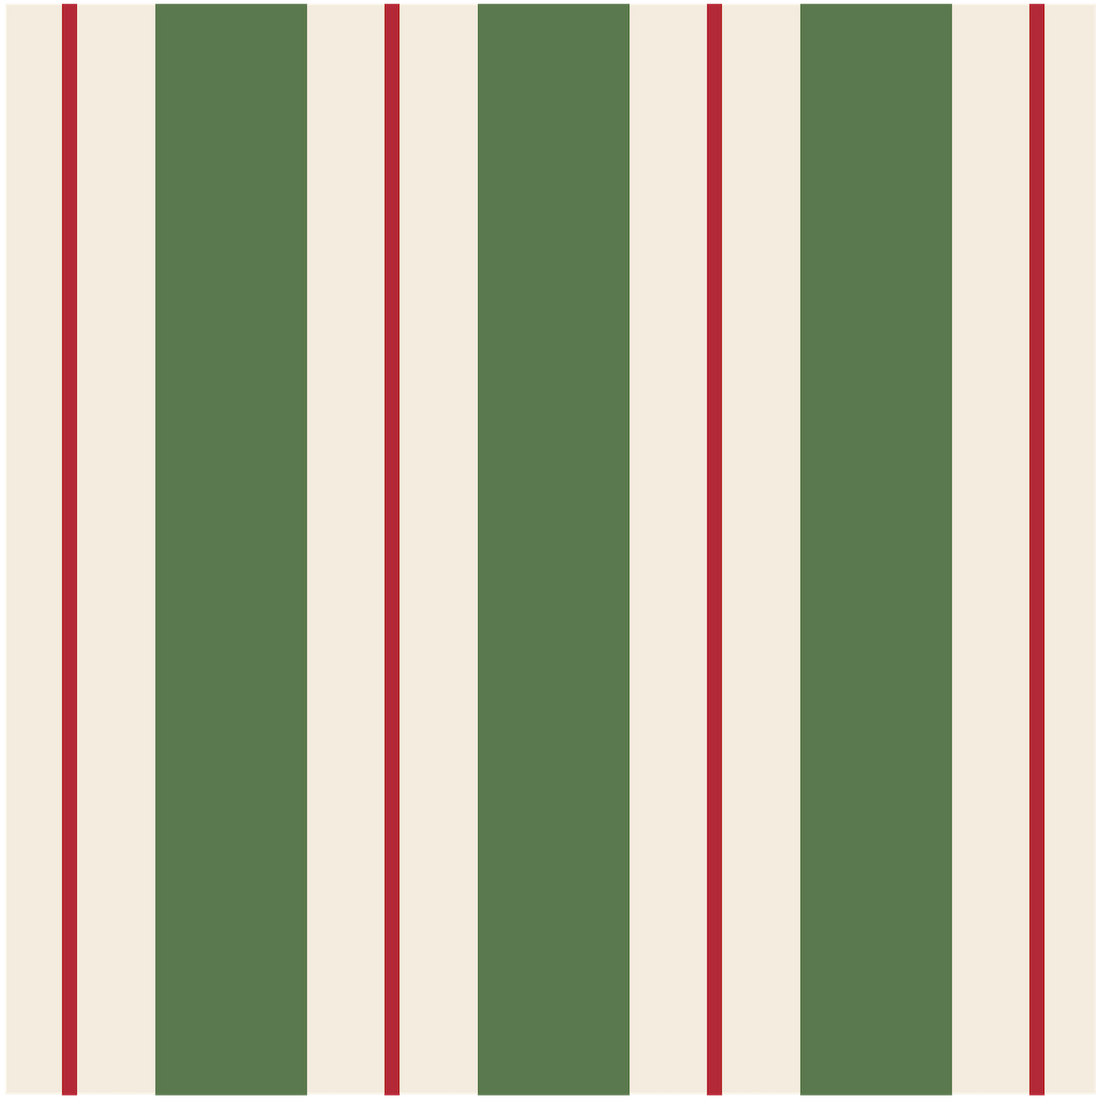 A square cocktail napkin featuring vertical dark green and white stripes, with a thin red line centered in each white stripe.